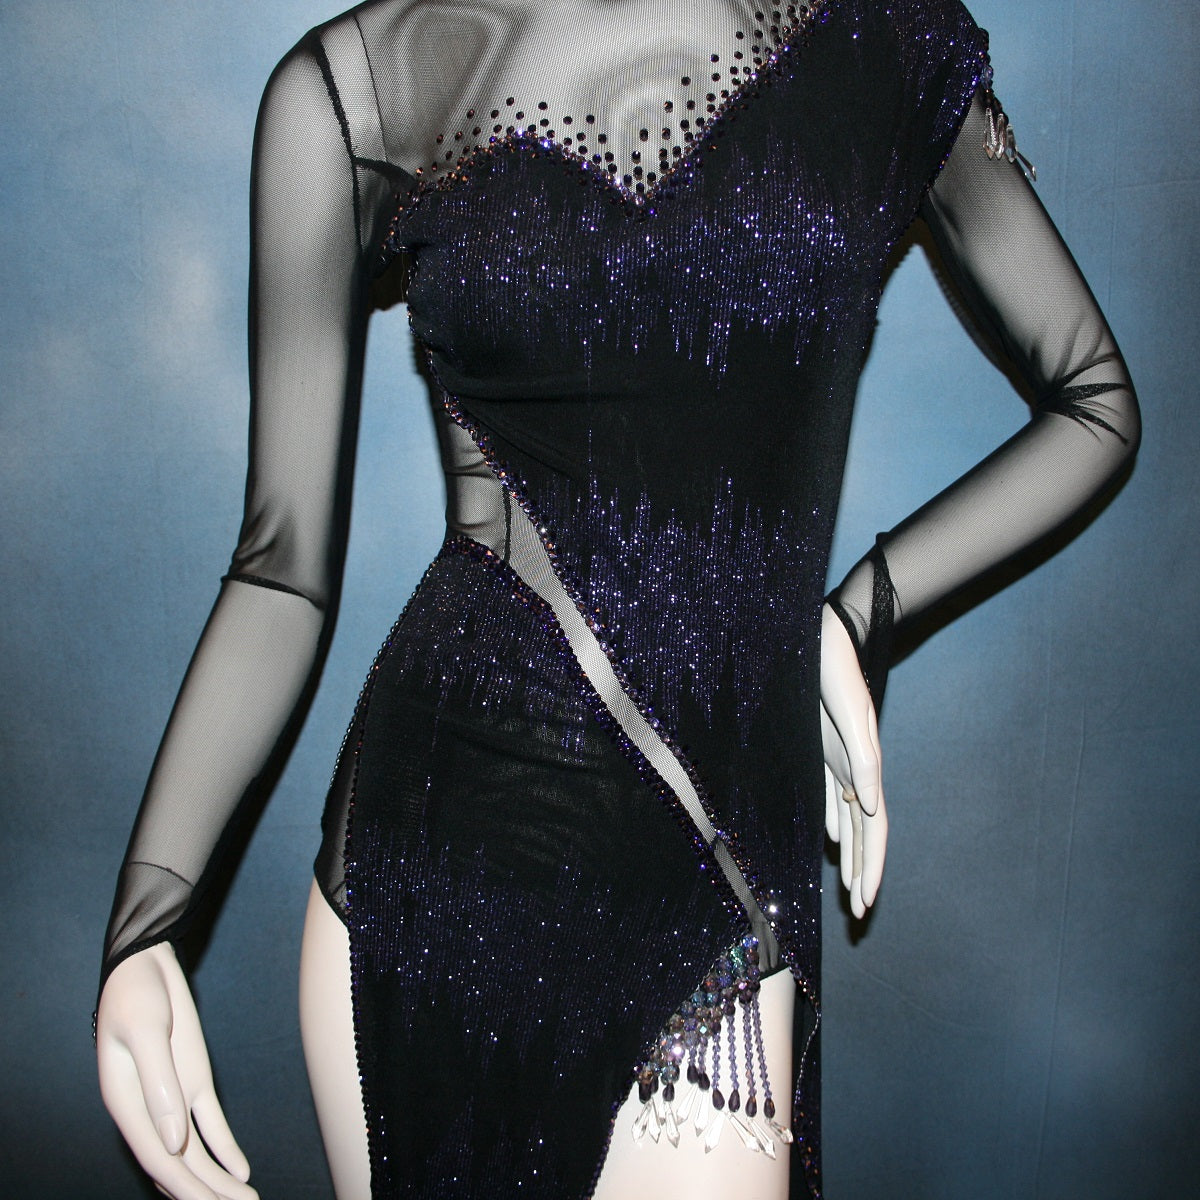 close up view of Crystal's Creations Latin/rhythm/tango dress created in black glitter slinky with an awesome electrifying tanzanite/perwinkle glitter pattern artistically placed on a black stretch mesh base